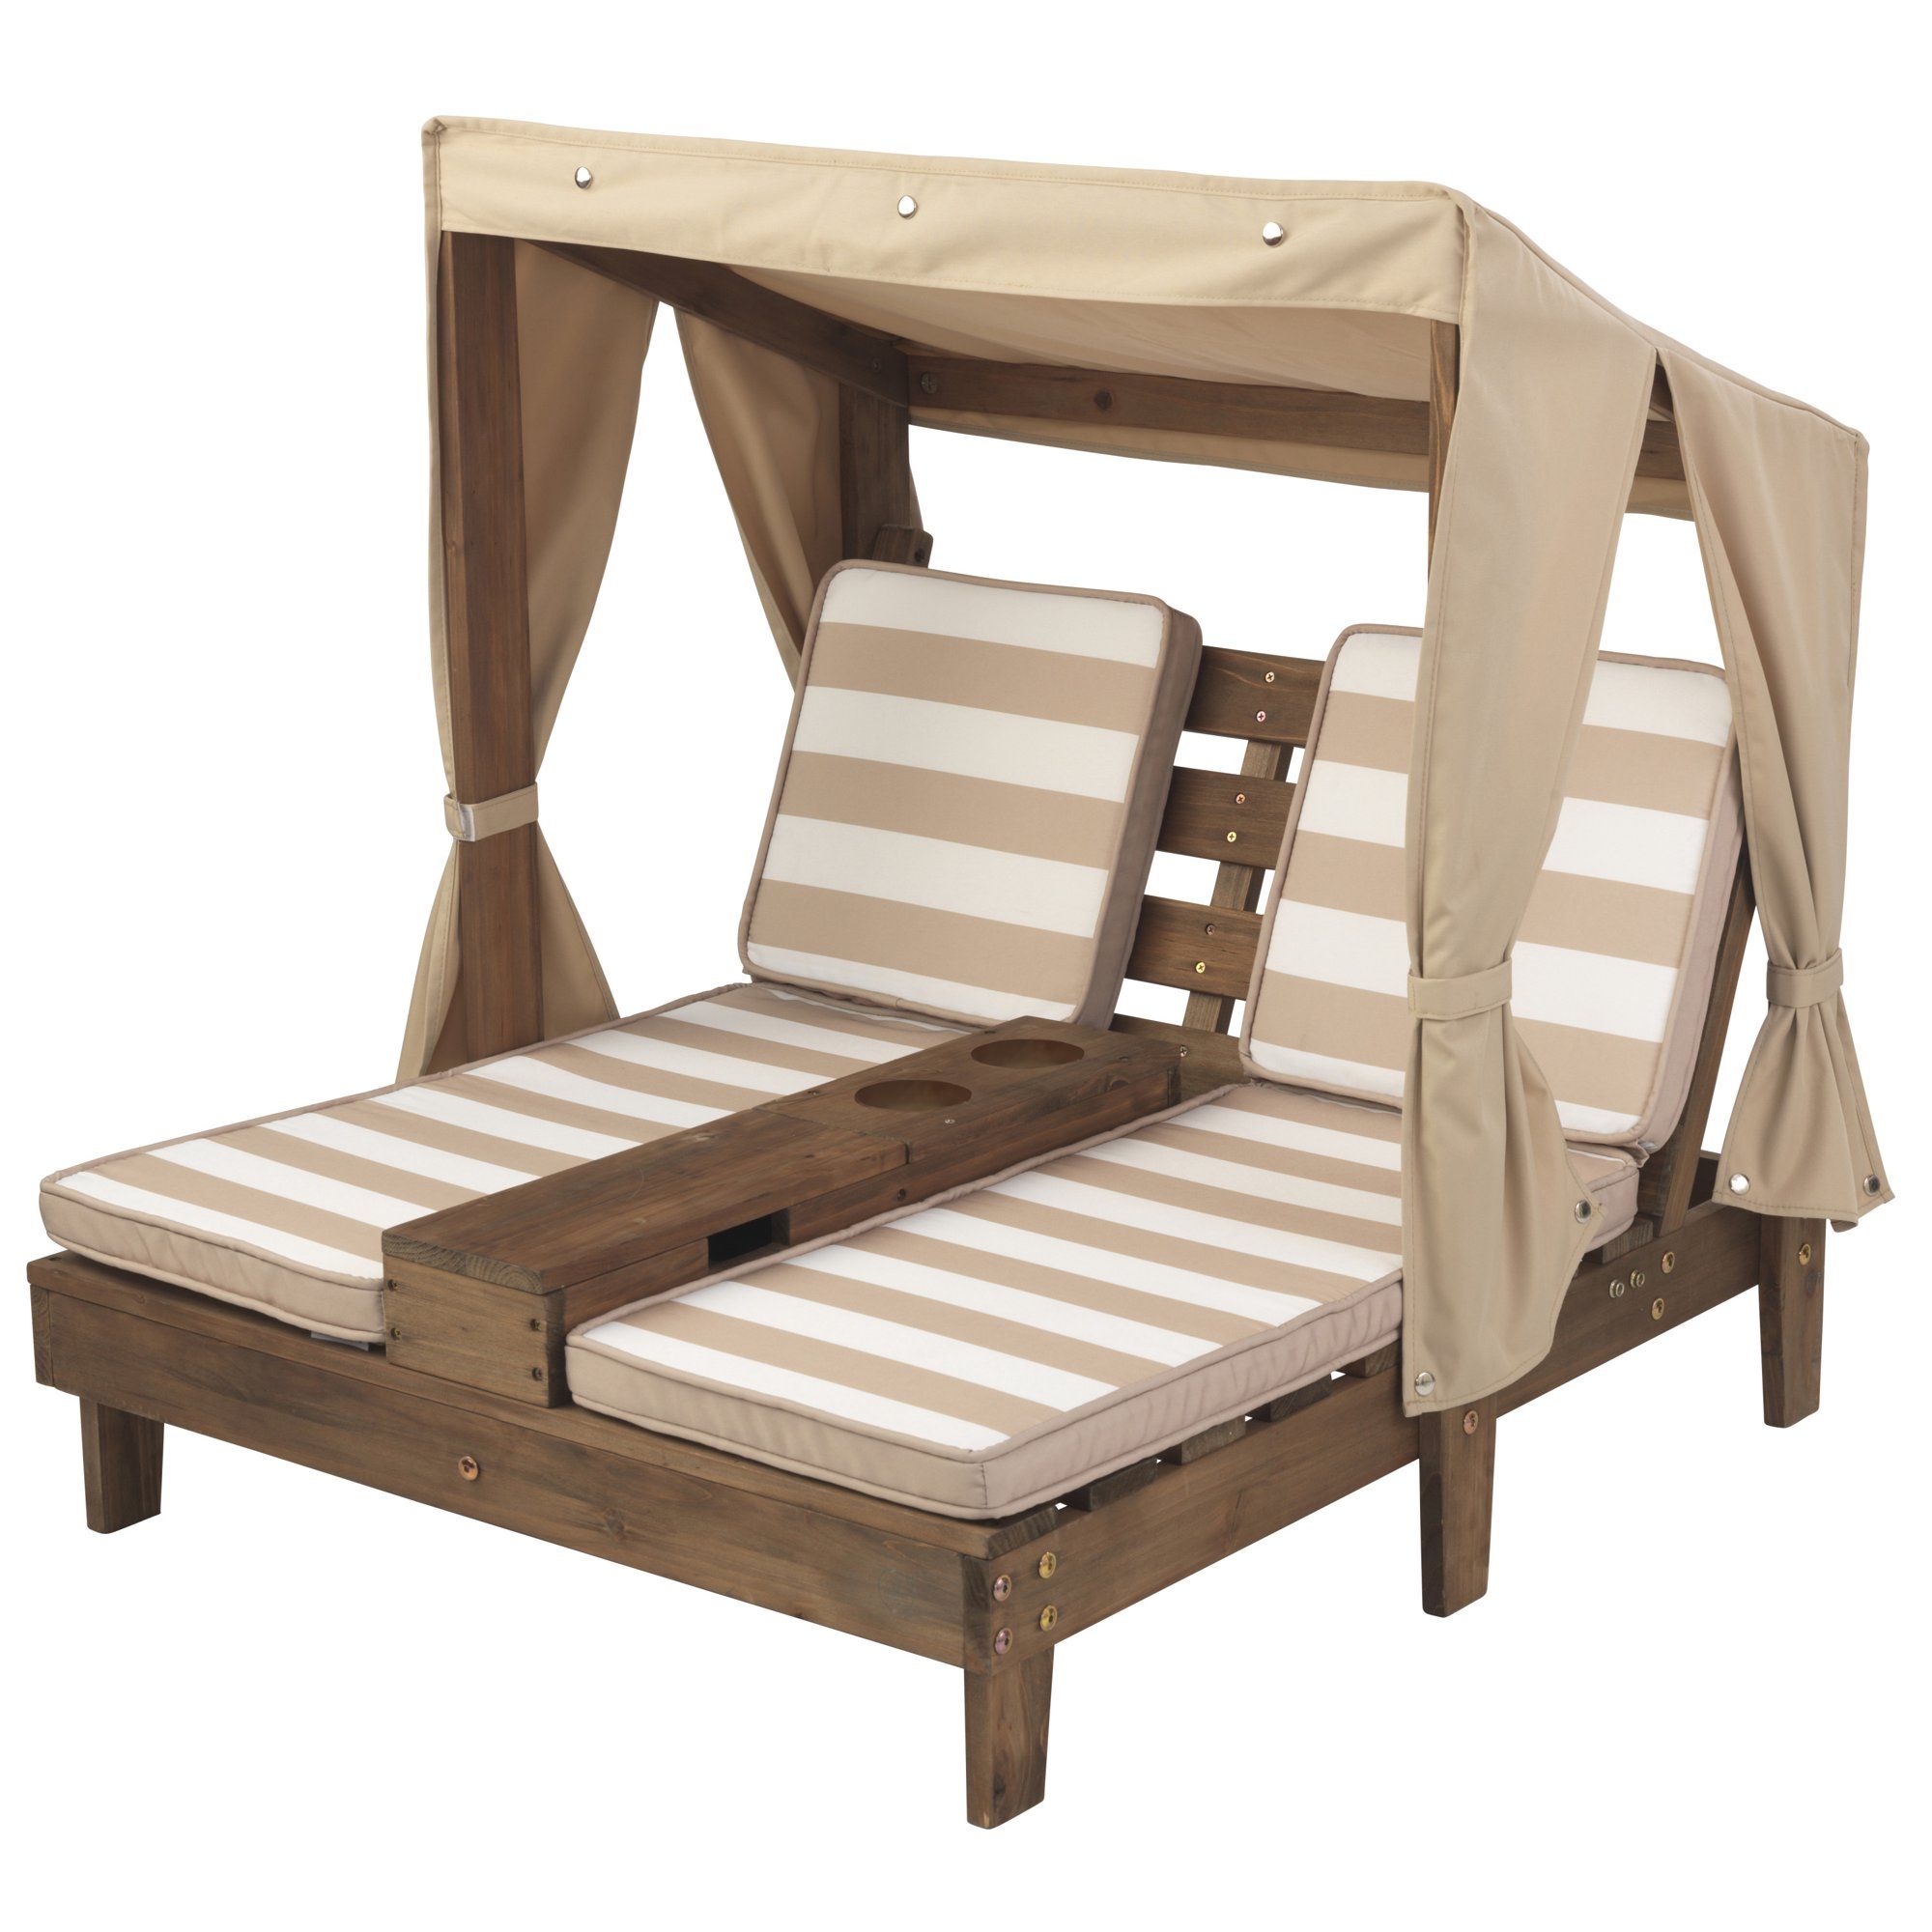 KidKraft Double Chaise Lounge with Cup Holders - Espresso & Oatmeal | Walmart (US)